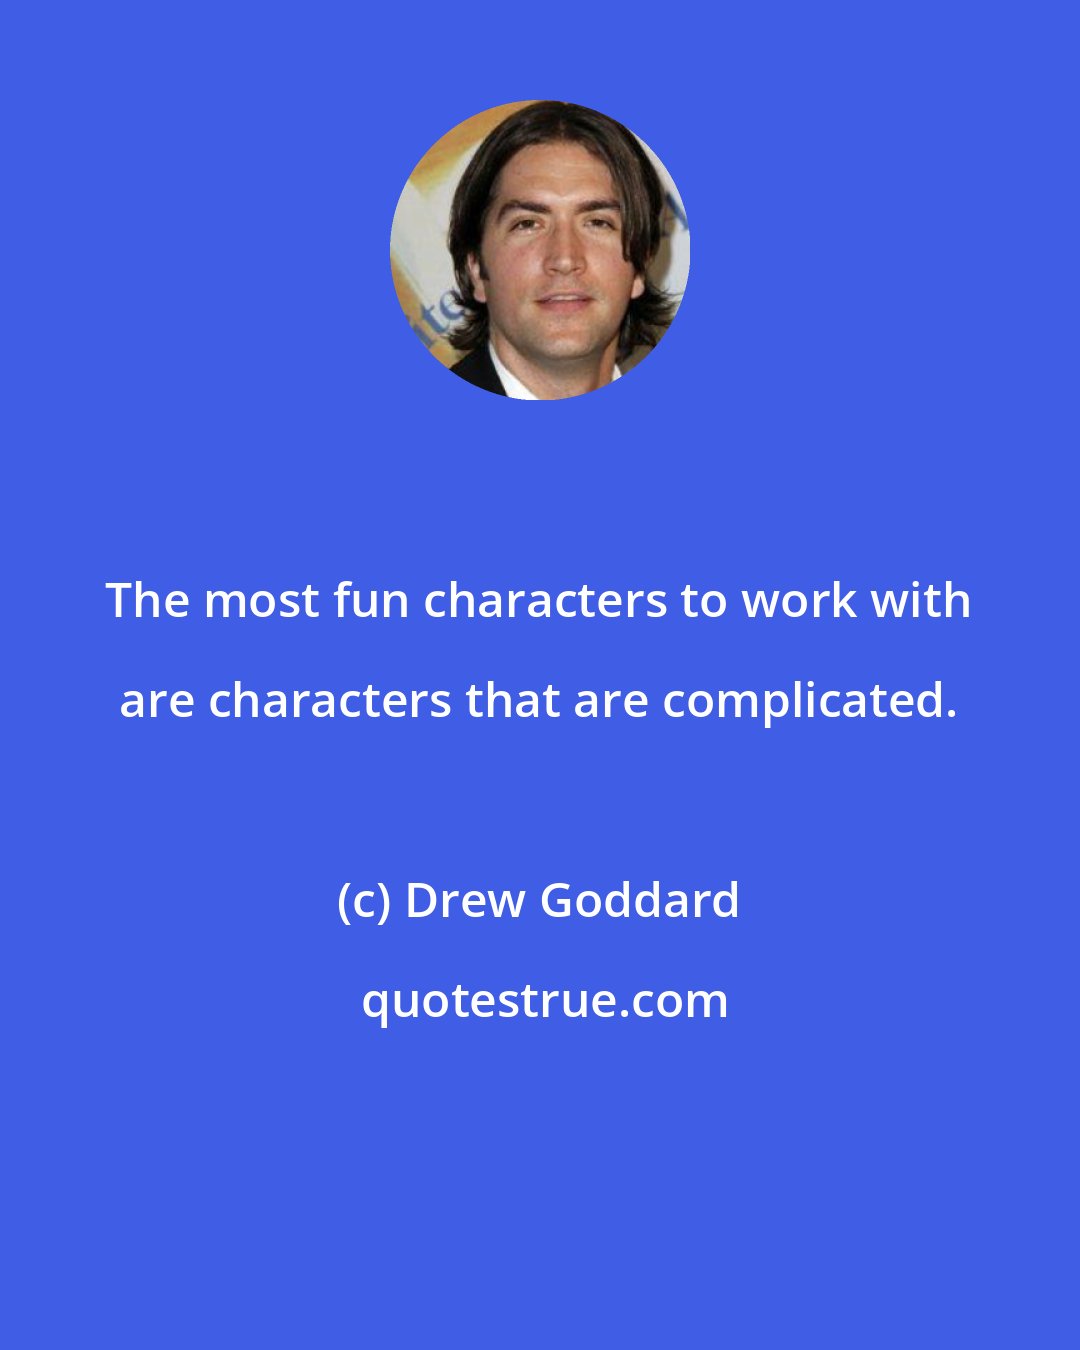 Drew Goddard: The most fun characters to work with are characters that are complicated.